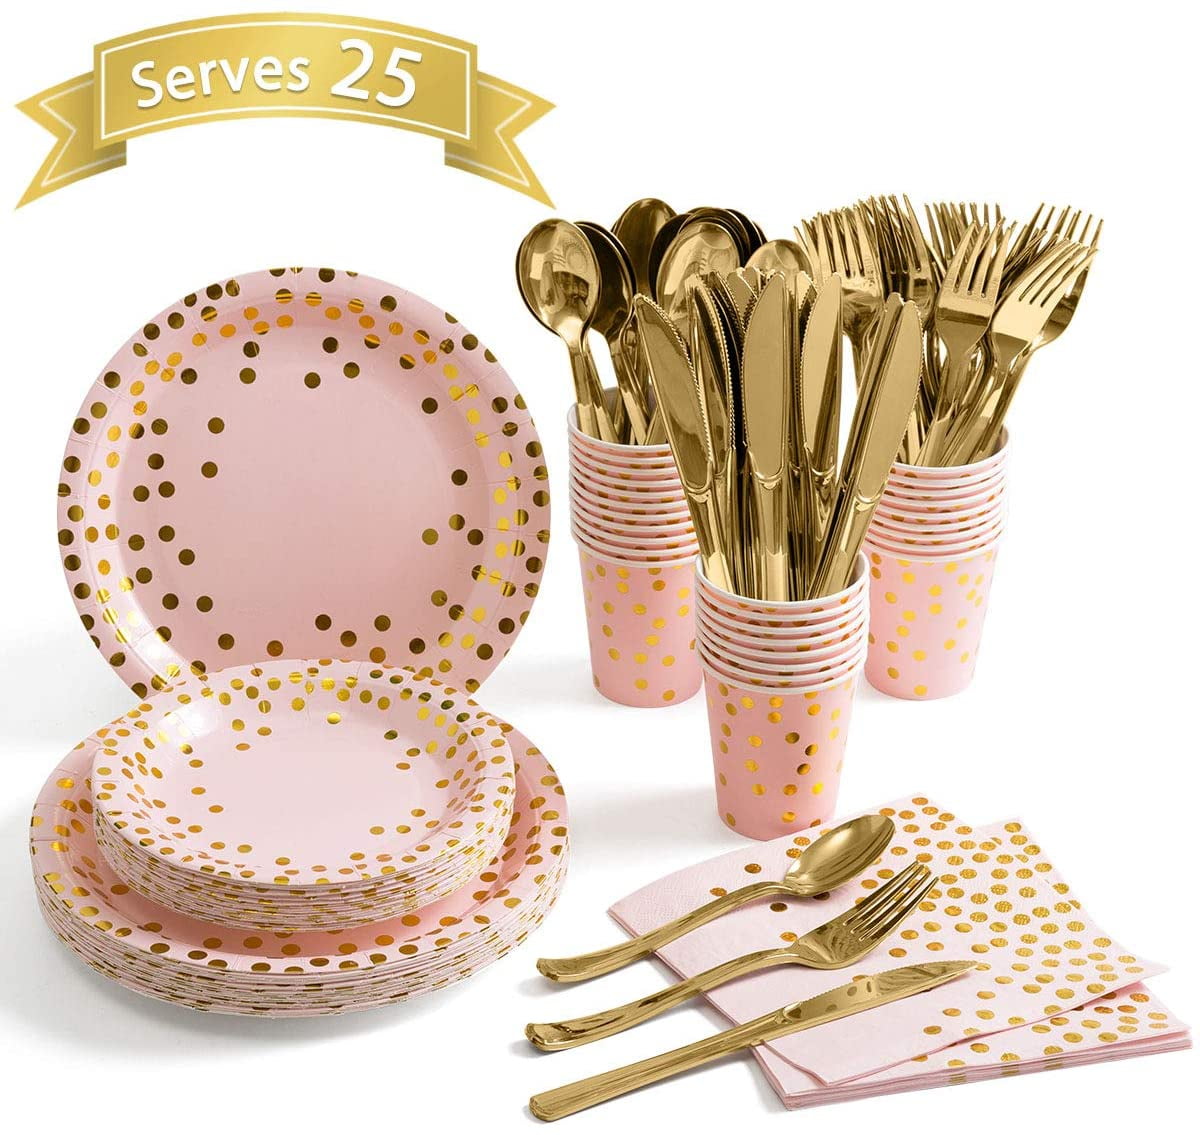 25 Spoons,25 Knives 25 Cups,25 Napkins for Wedding & Party & Shower 25 Forks Morejoy 175pcs Pink Gold Plastic Plates-Pink Disposable Plates include: 25 Dinner Plates,25 Dessert Plates 